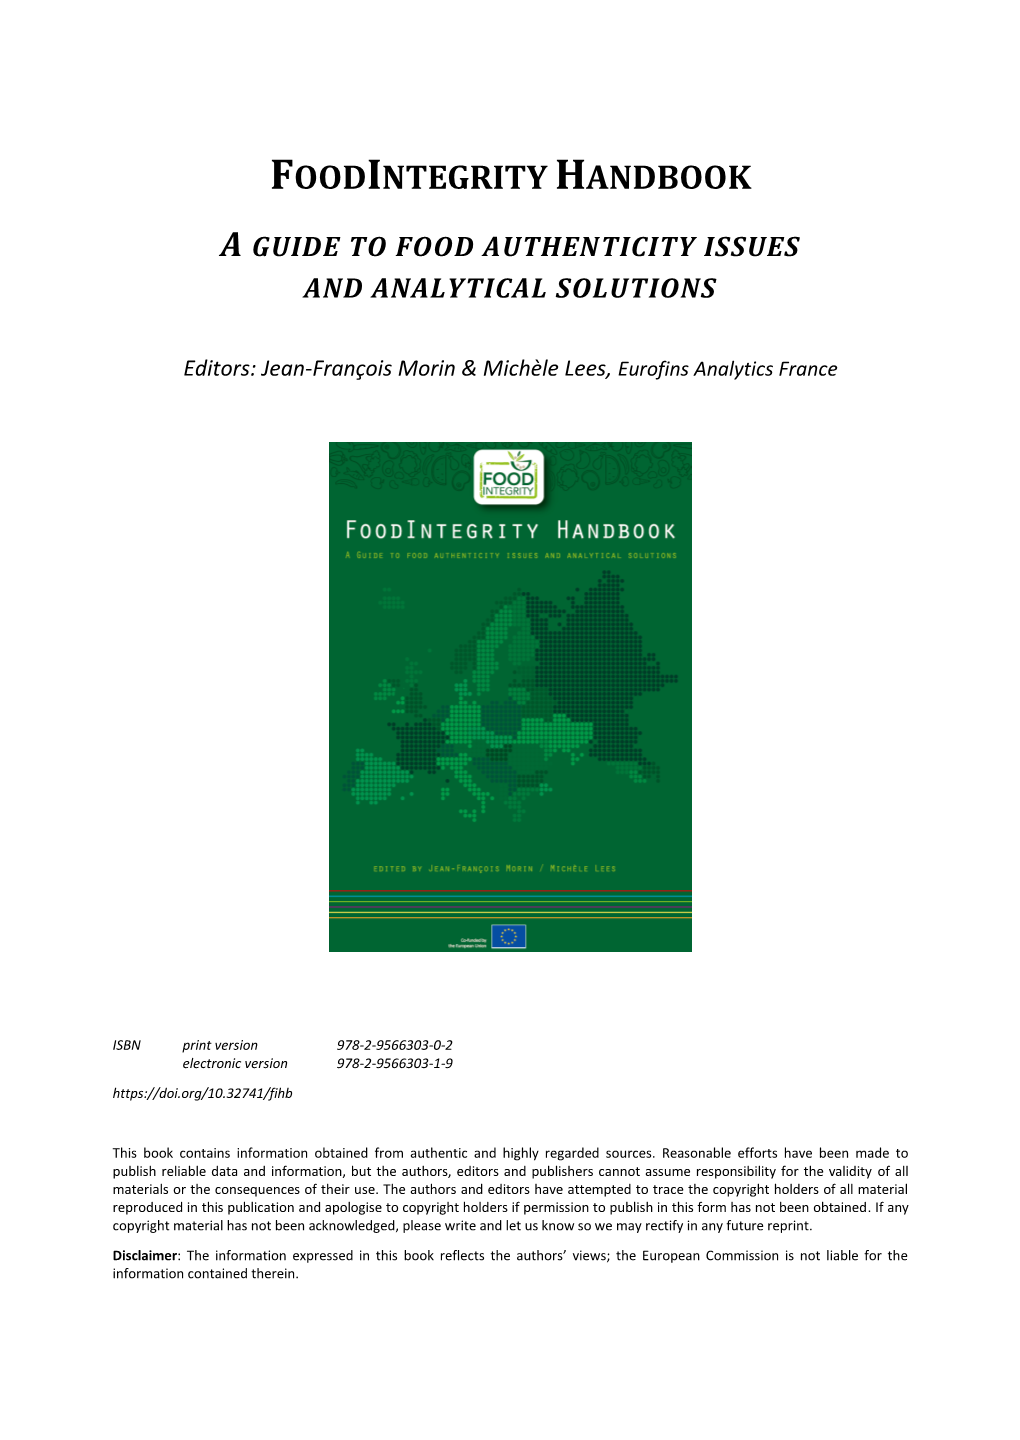 A Guide to Food Authenticity Issues and Analytical Solutions